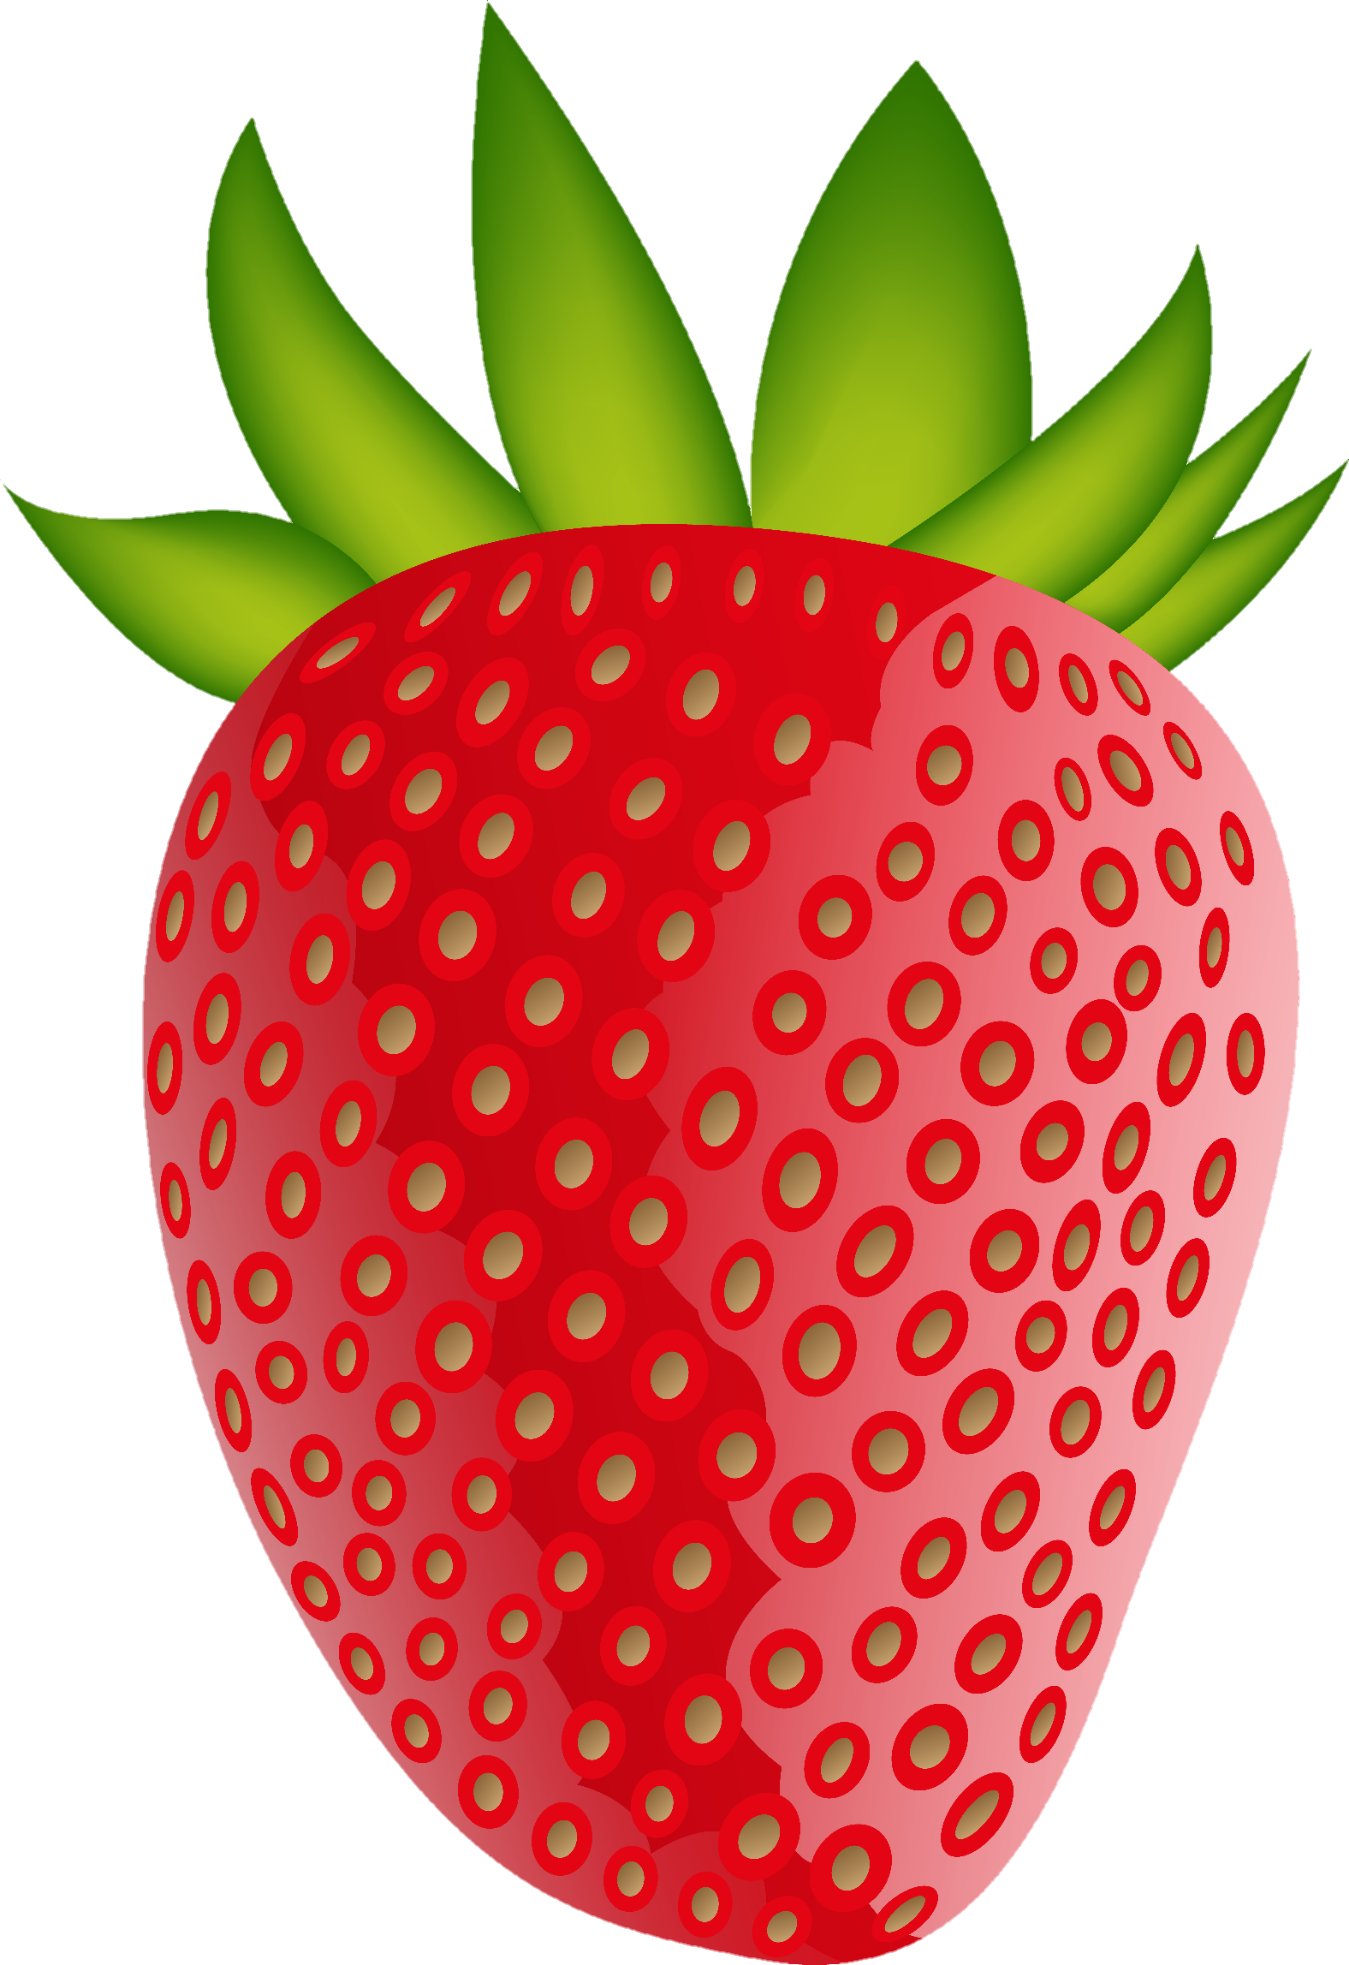 strawberry-png-image-from-pngfre-1